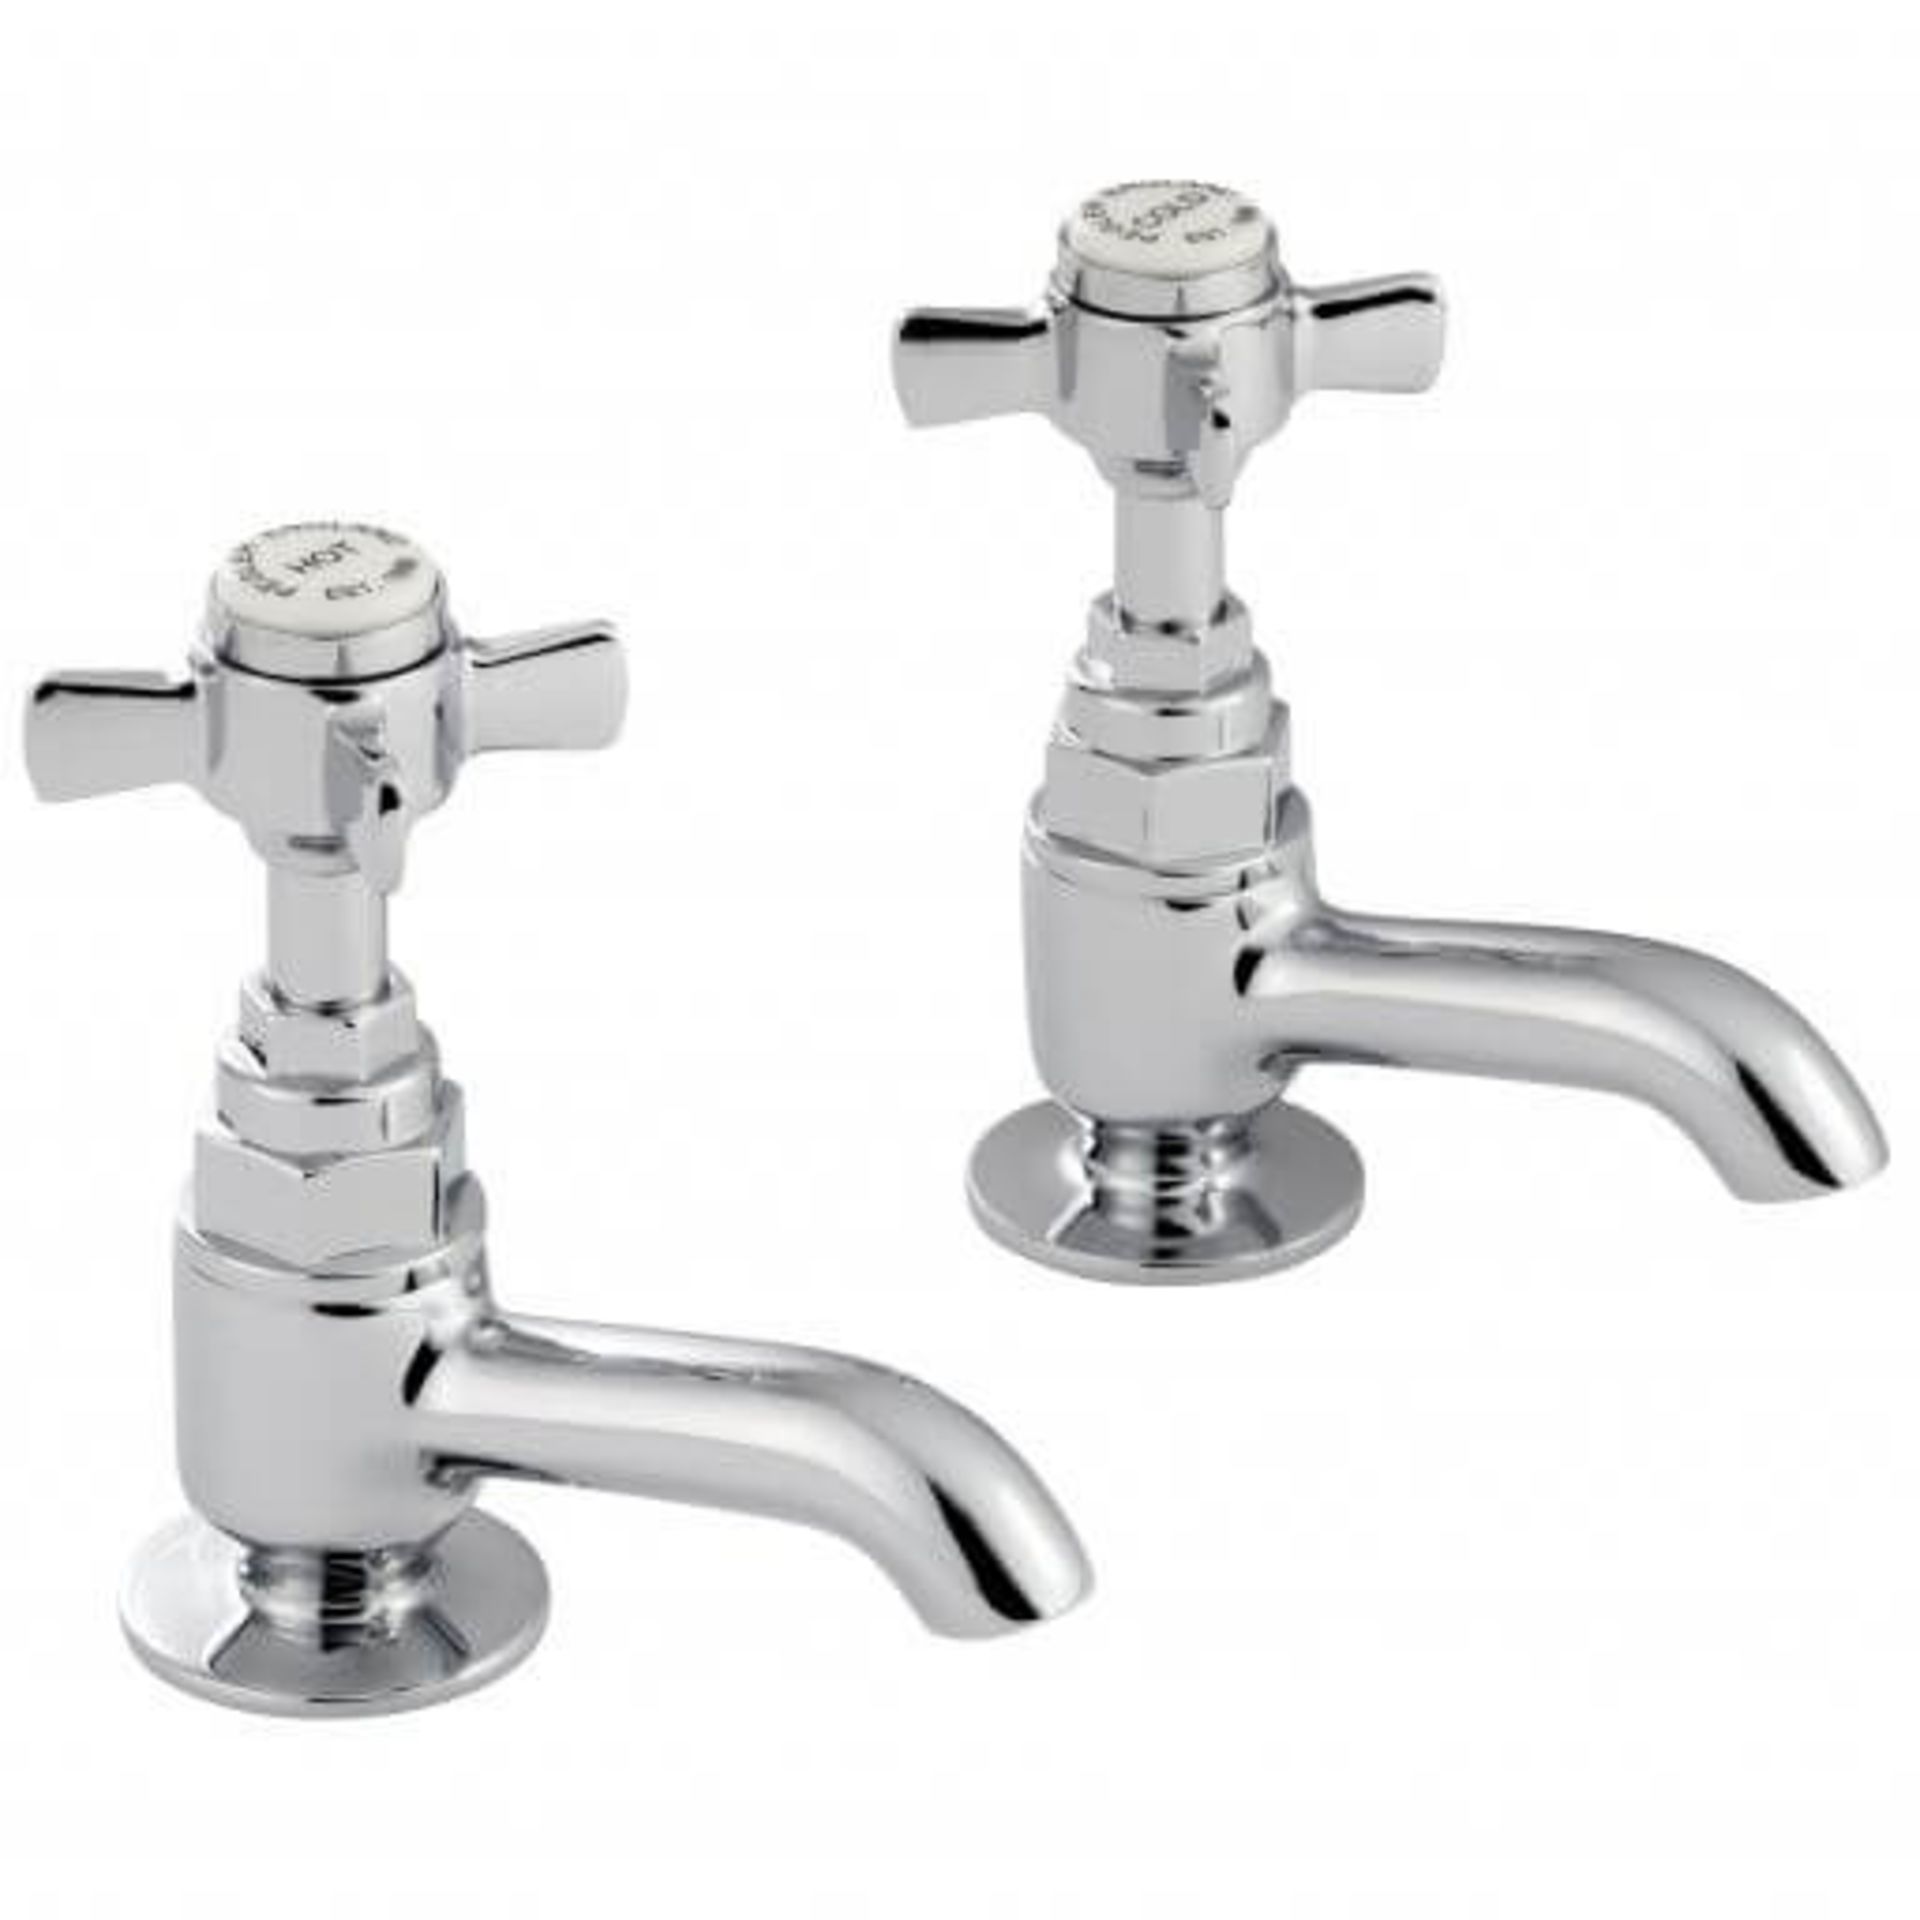 New (A172) Traditional Pair Of Basin Taps. New (A172) Traditional Pair Of Basin Taps.   New (A172)